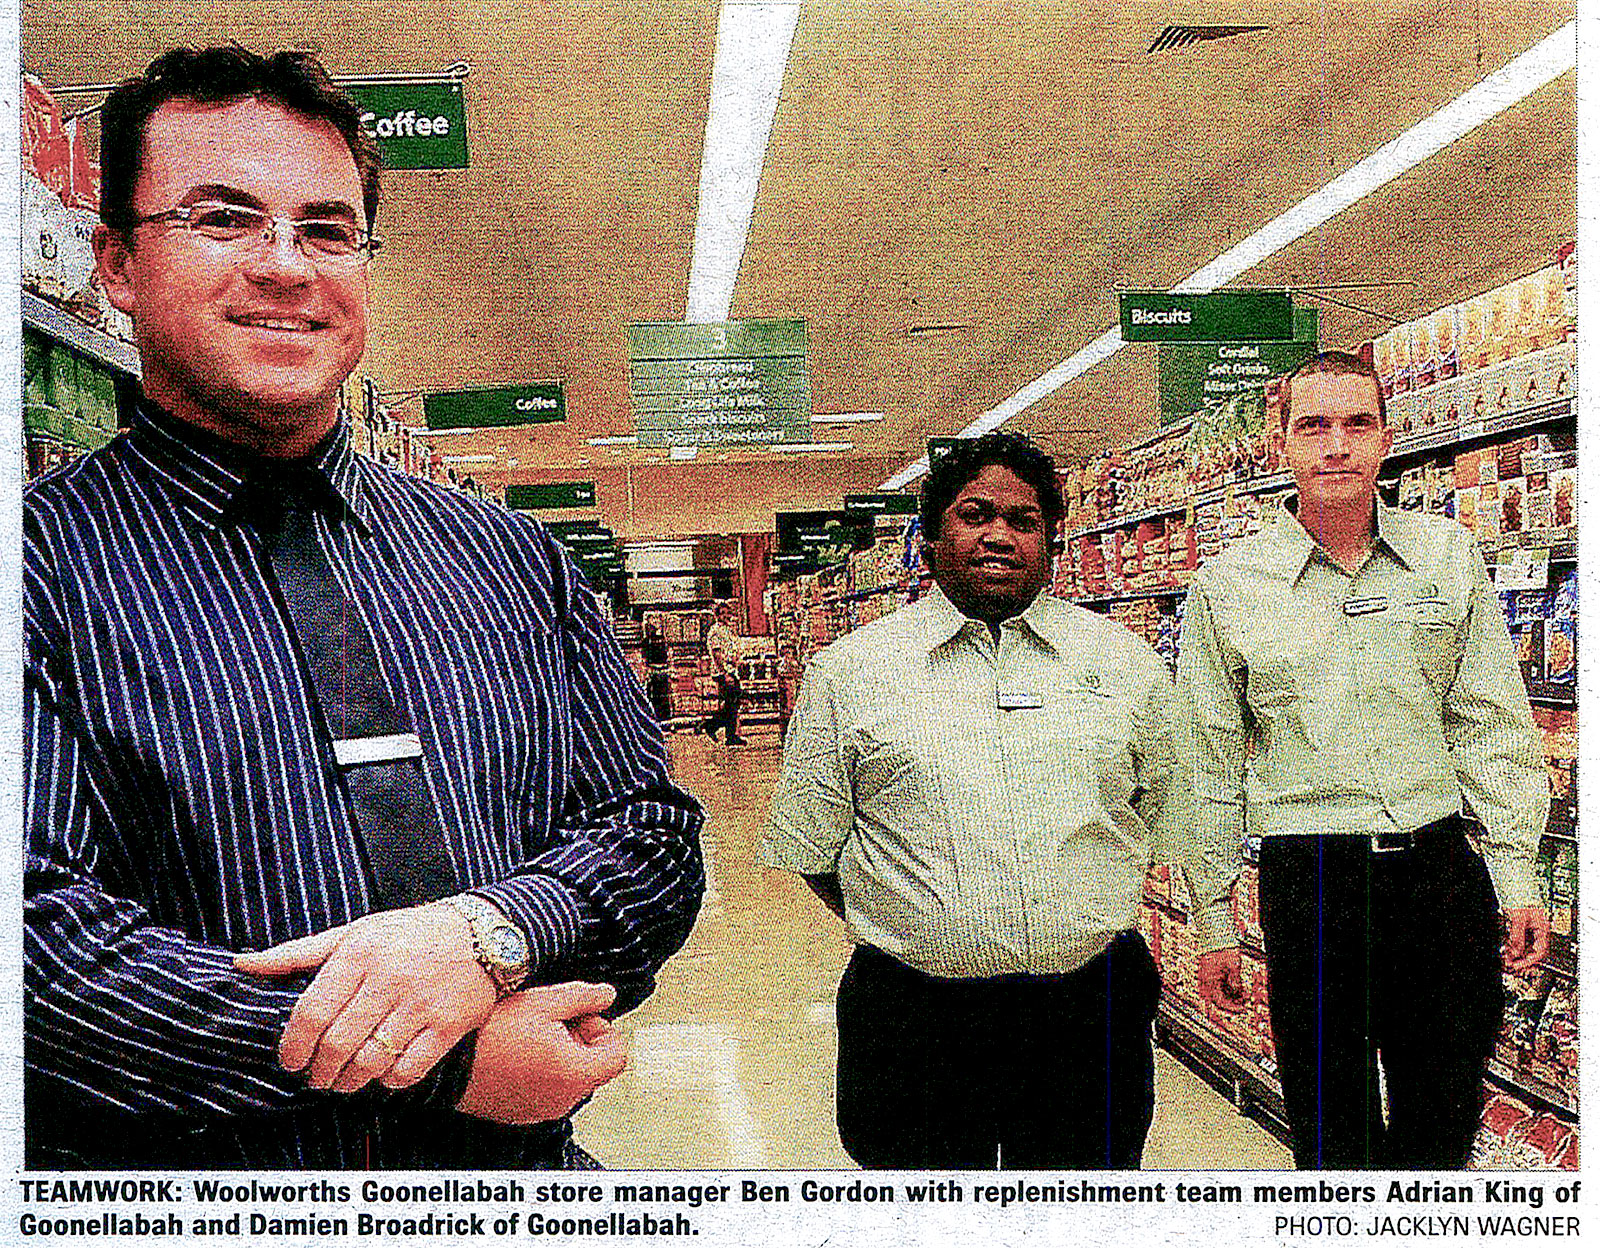 Woolworths Goonellabah store manager Ben Gordon with replenished team members Adrian King of Goonellabah and Damien Broadrick of Goonellabah.